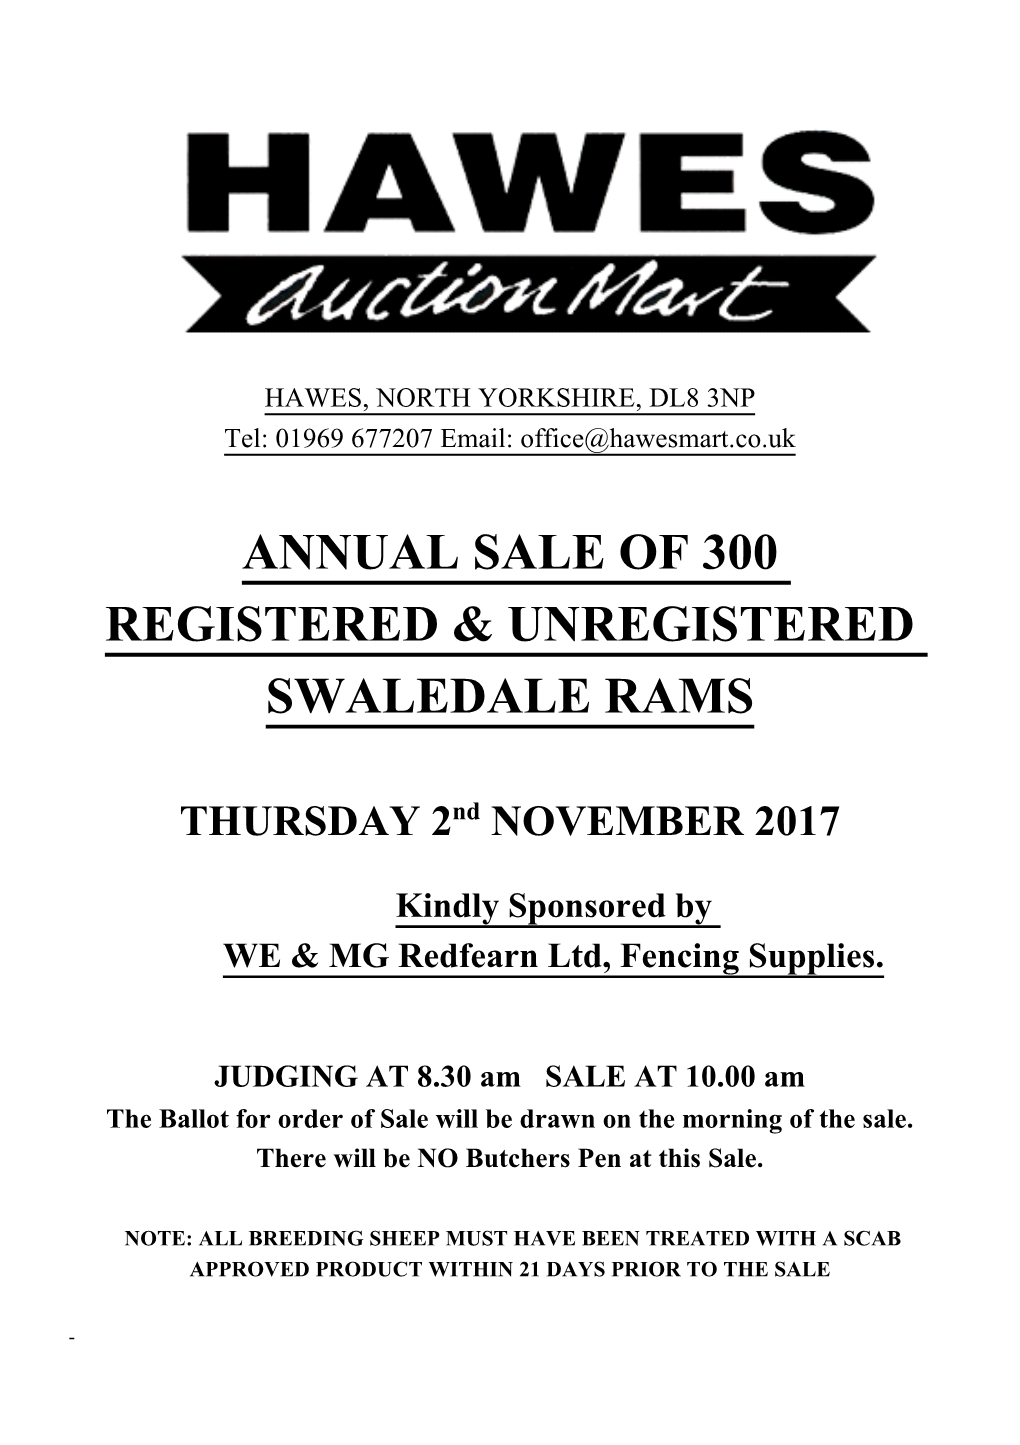 Annual Sale of 300 Registered & Unregistered Swaledale